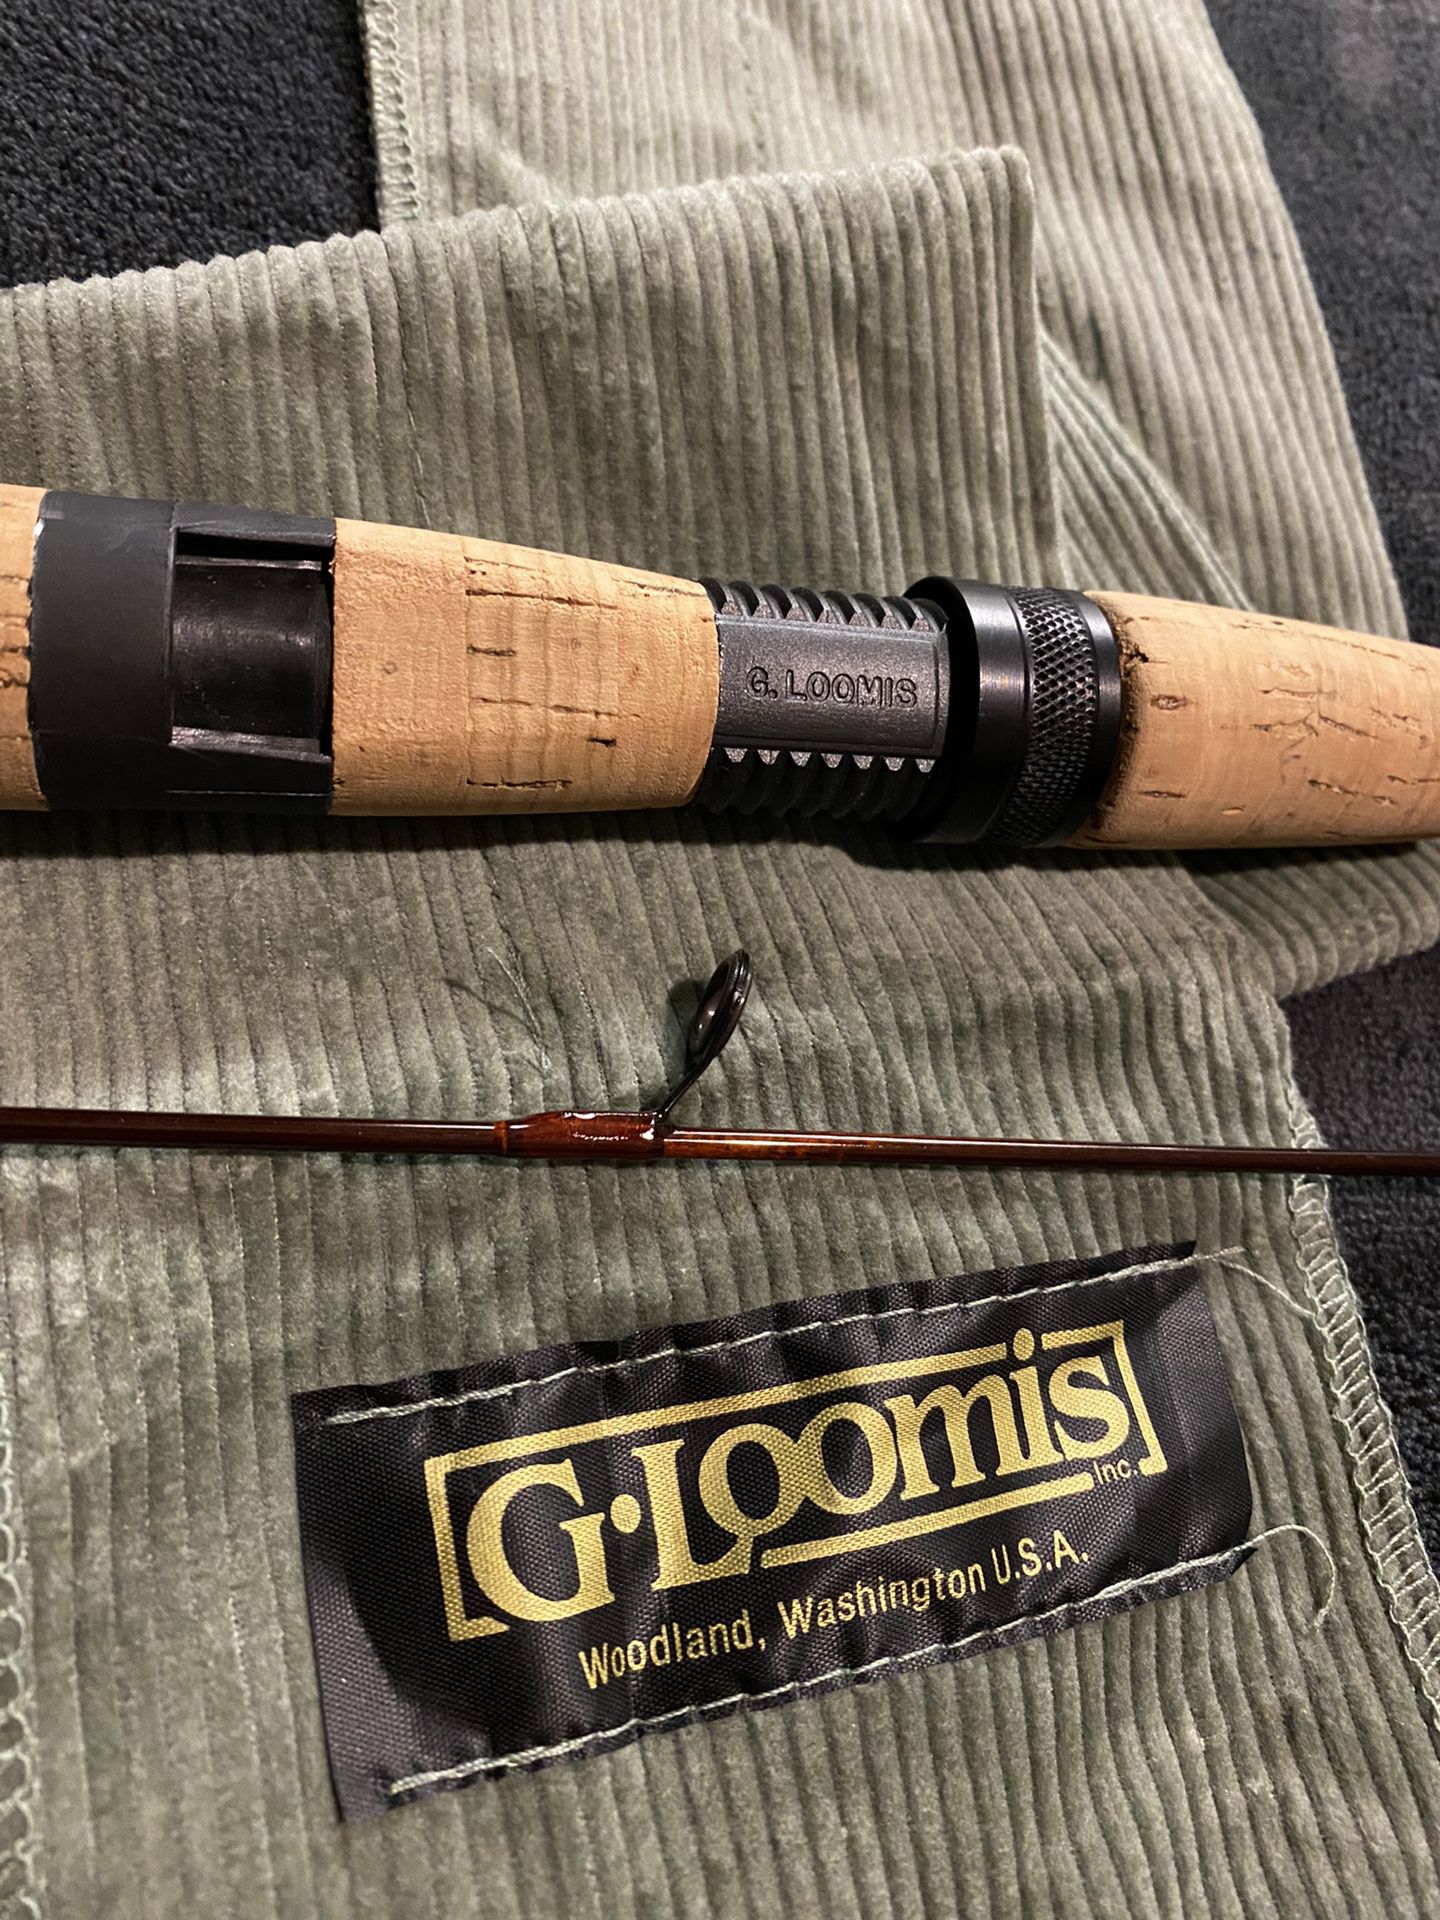 G Loomis SR 843 7’ Spinning Fishing Rod for Sale in Riverside, CA - OfferUp